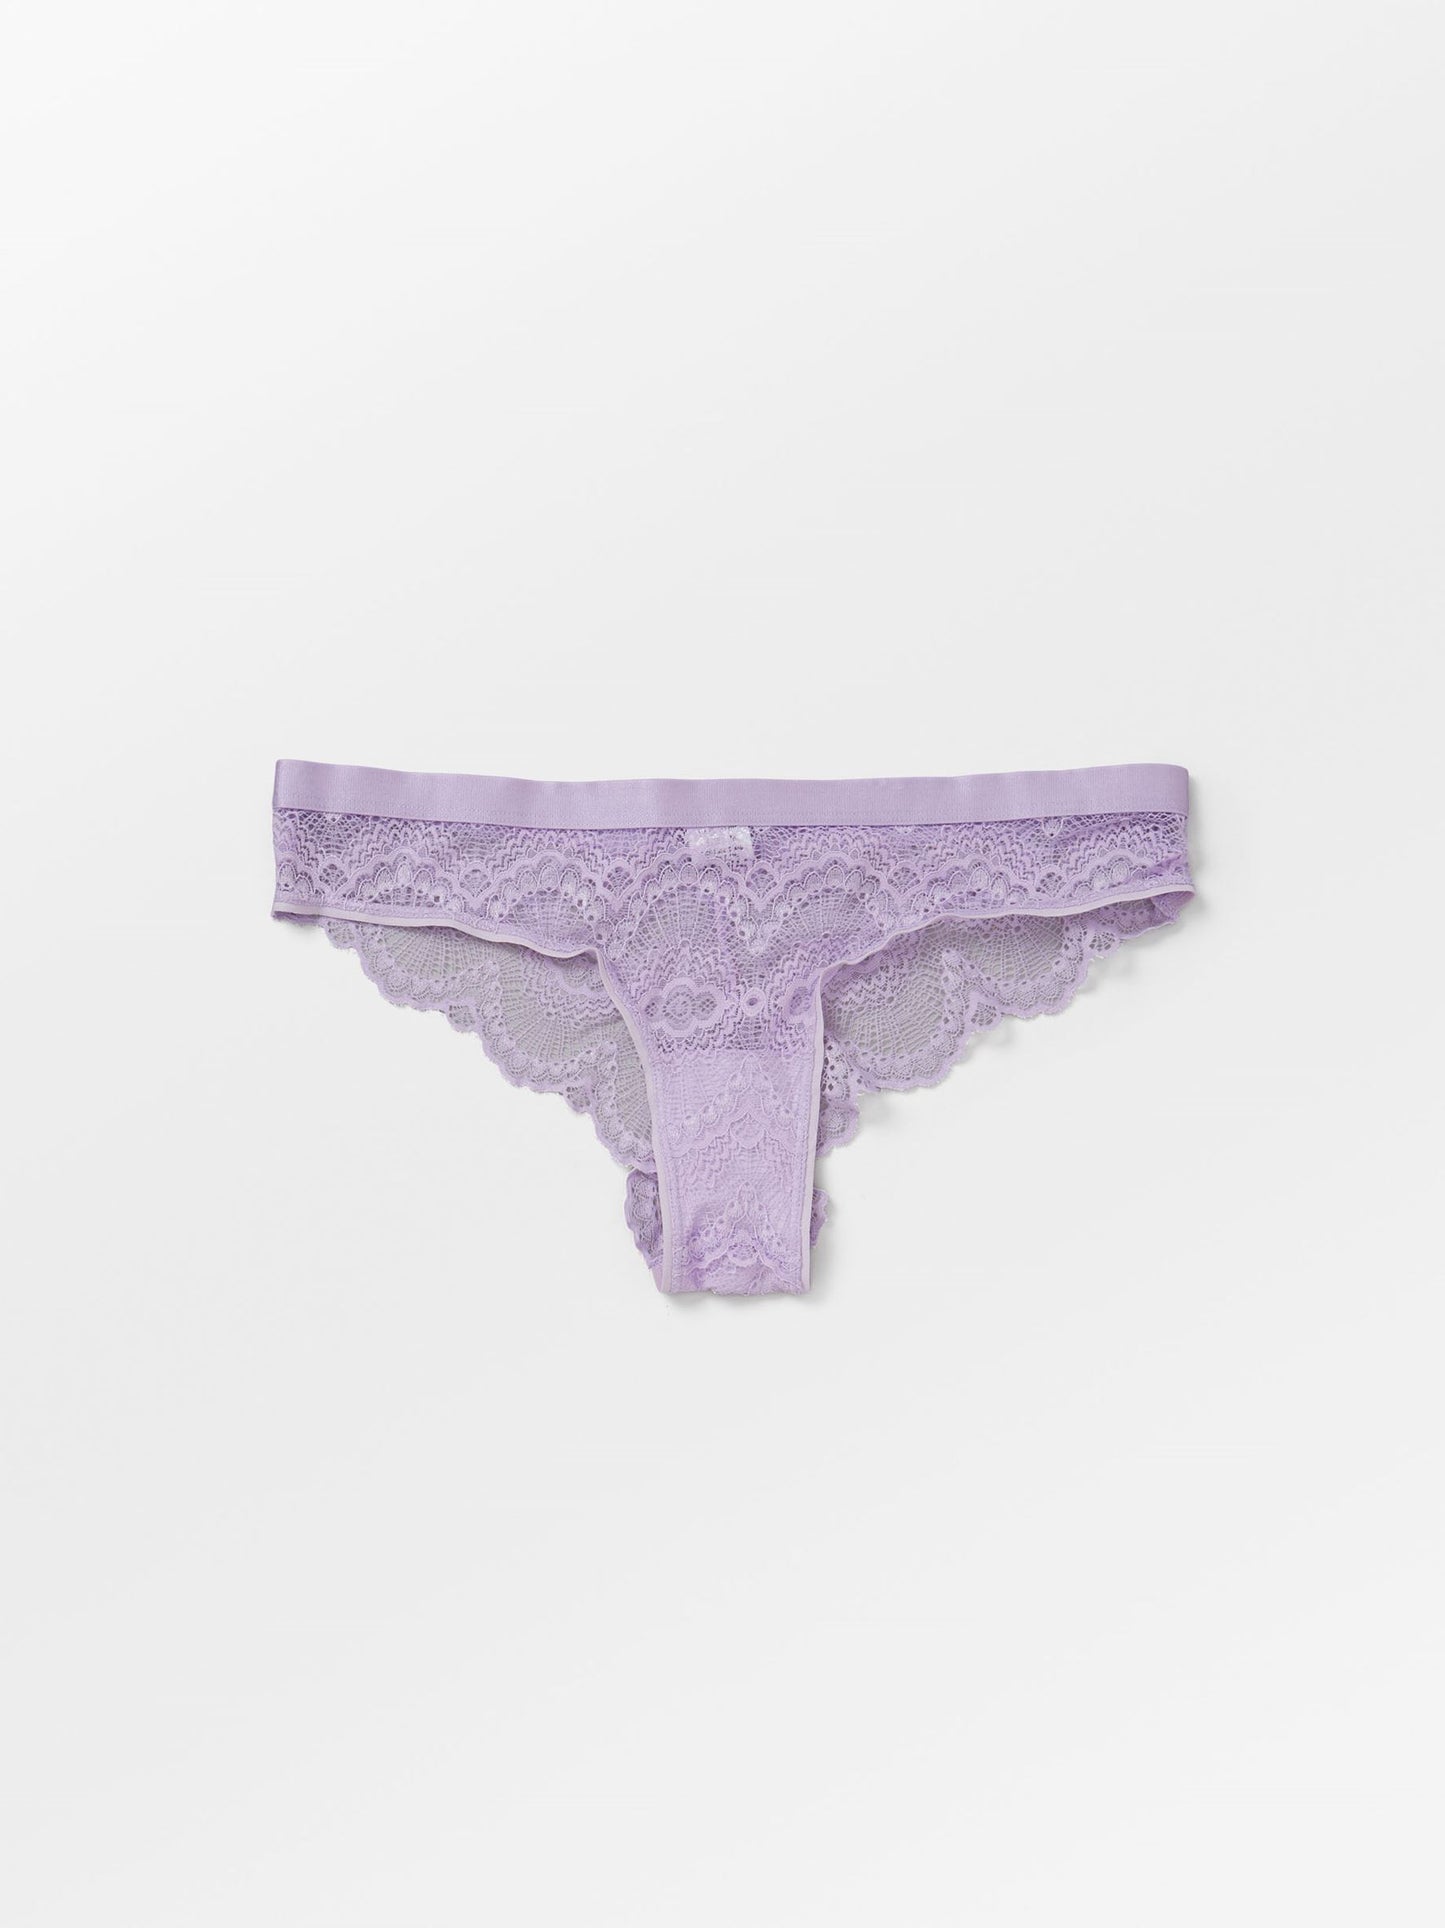 Becksöndergaard, Wave Lace Codie Cheeky 2 Pack - Orchid Bloom/Green, archive, sale